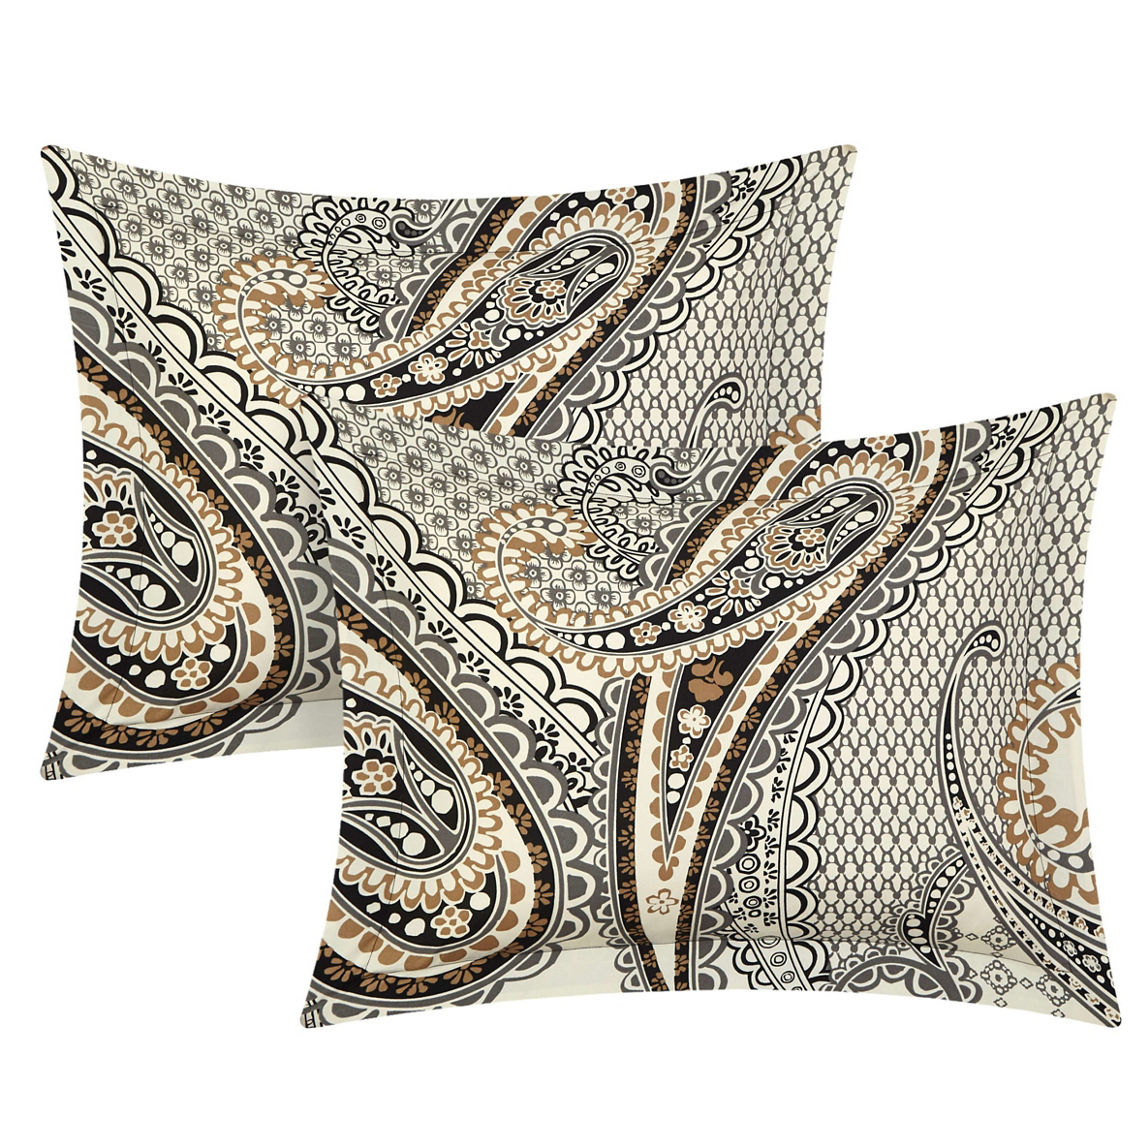 Chic Home Del Mar 8pc Comforter Set - Image 4 of 5